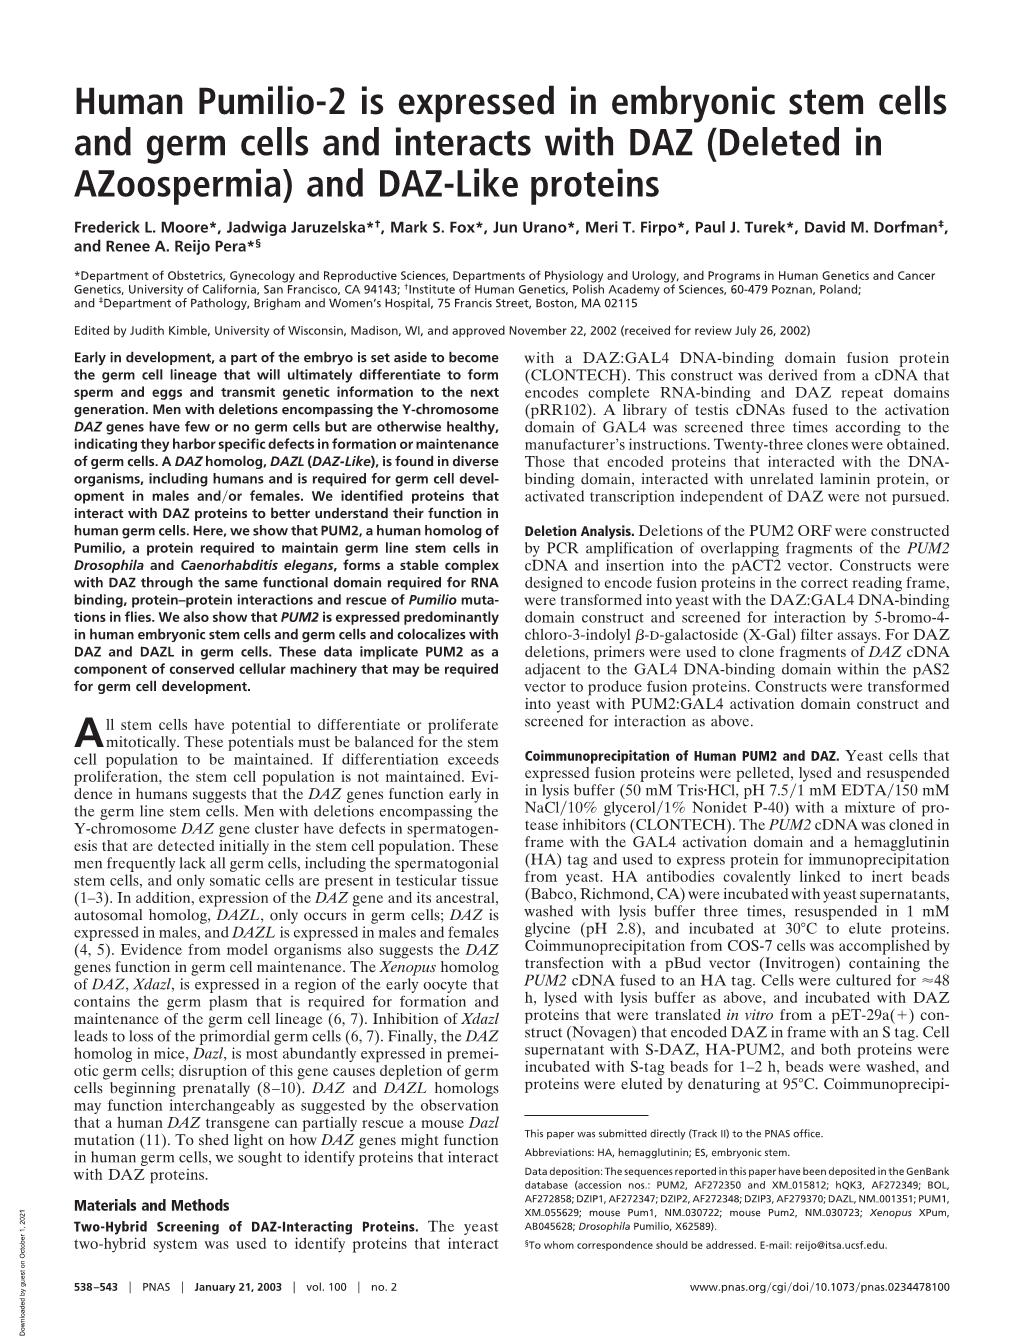 Human Pumilio-2 Is Expressed in Embryonic Stem Cells and Germ Cells and Interacts with DAZ (Deleted in Azoospermia) and DAZ-Like Proteins